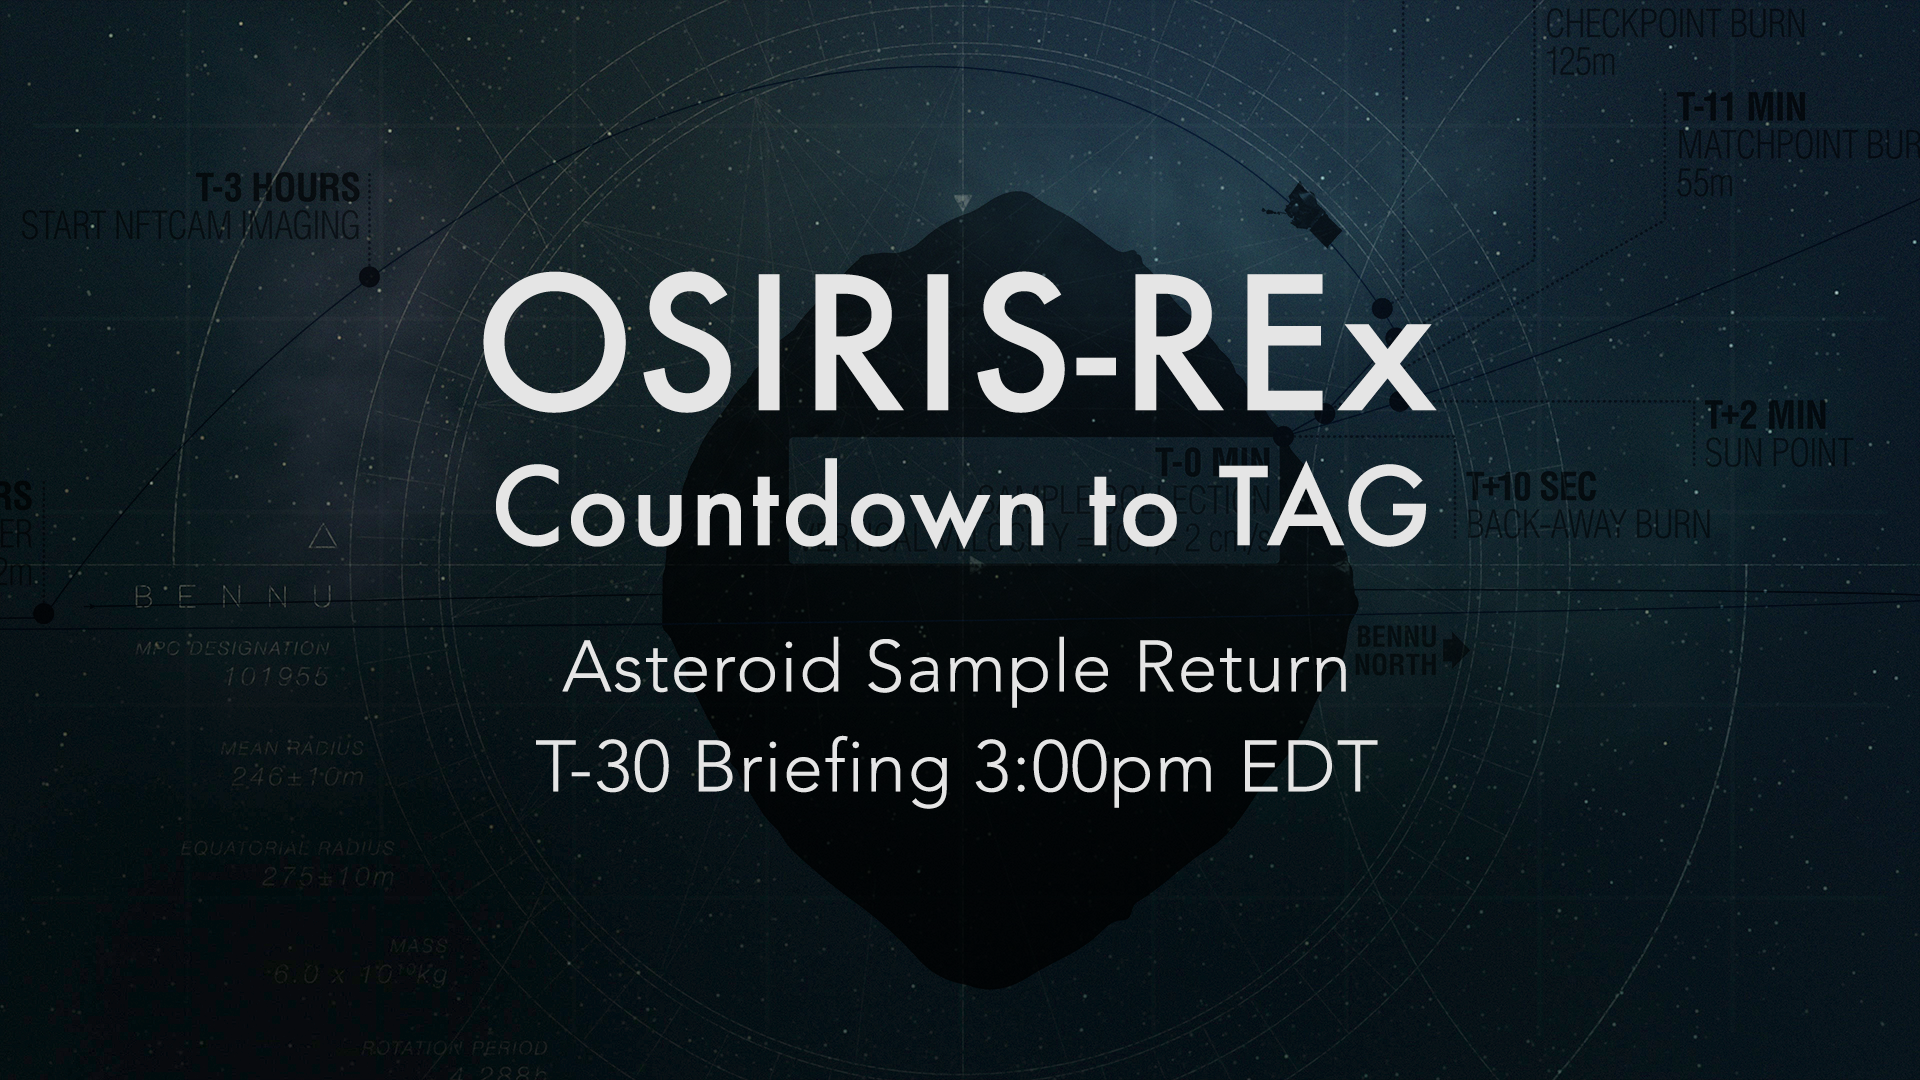 Preview Image for OSIRIS-REx: Countdown to TAG